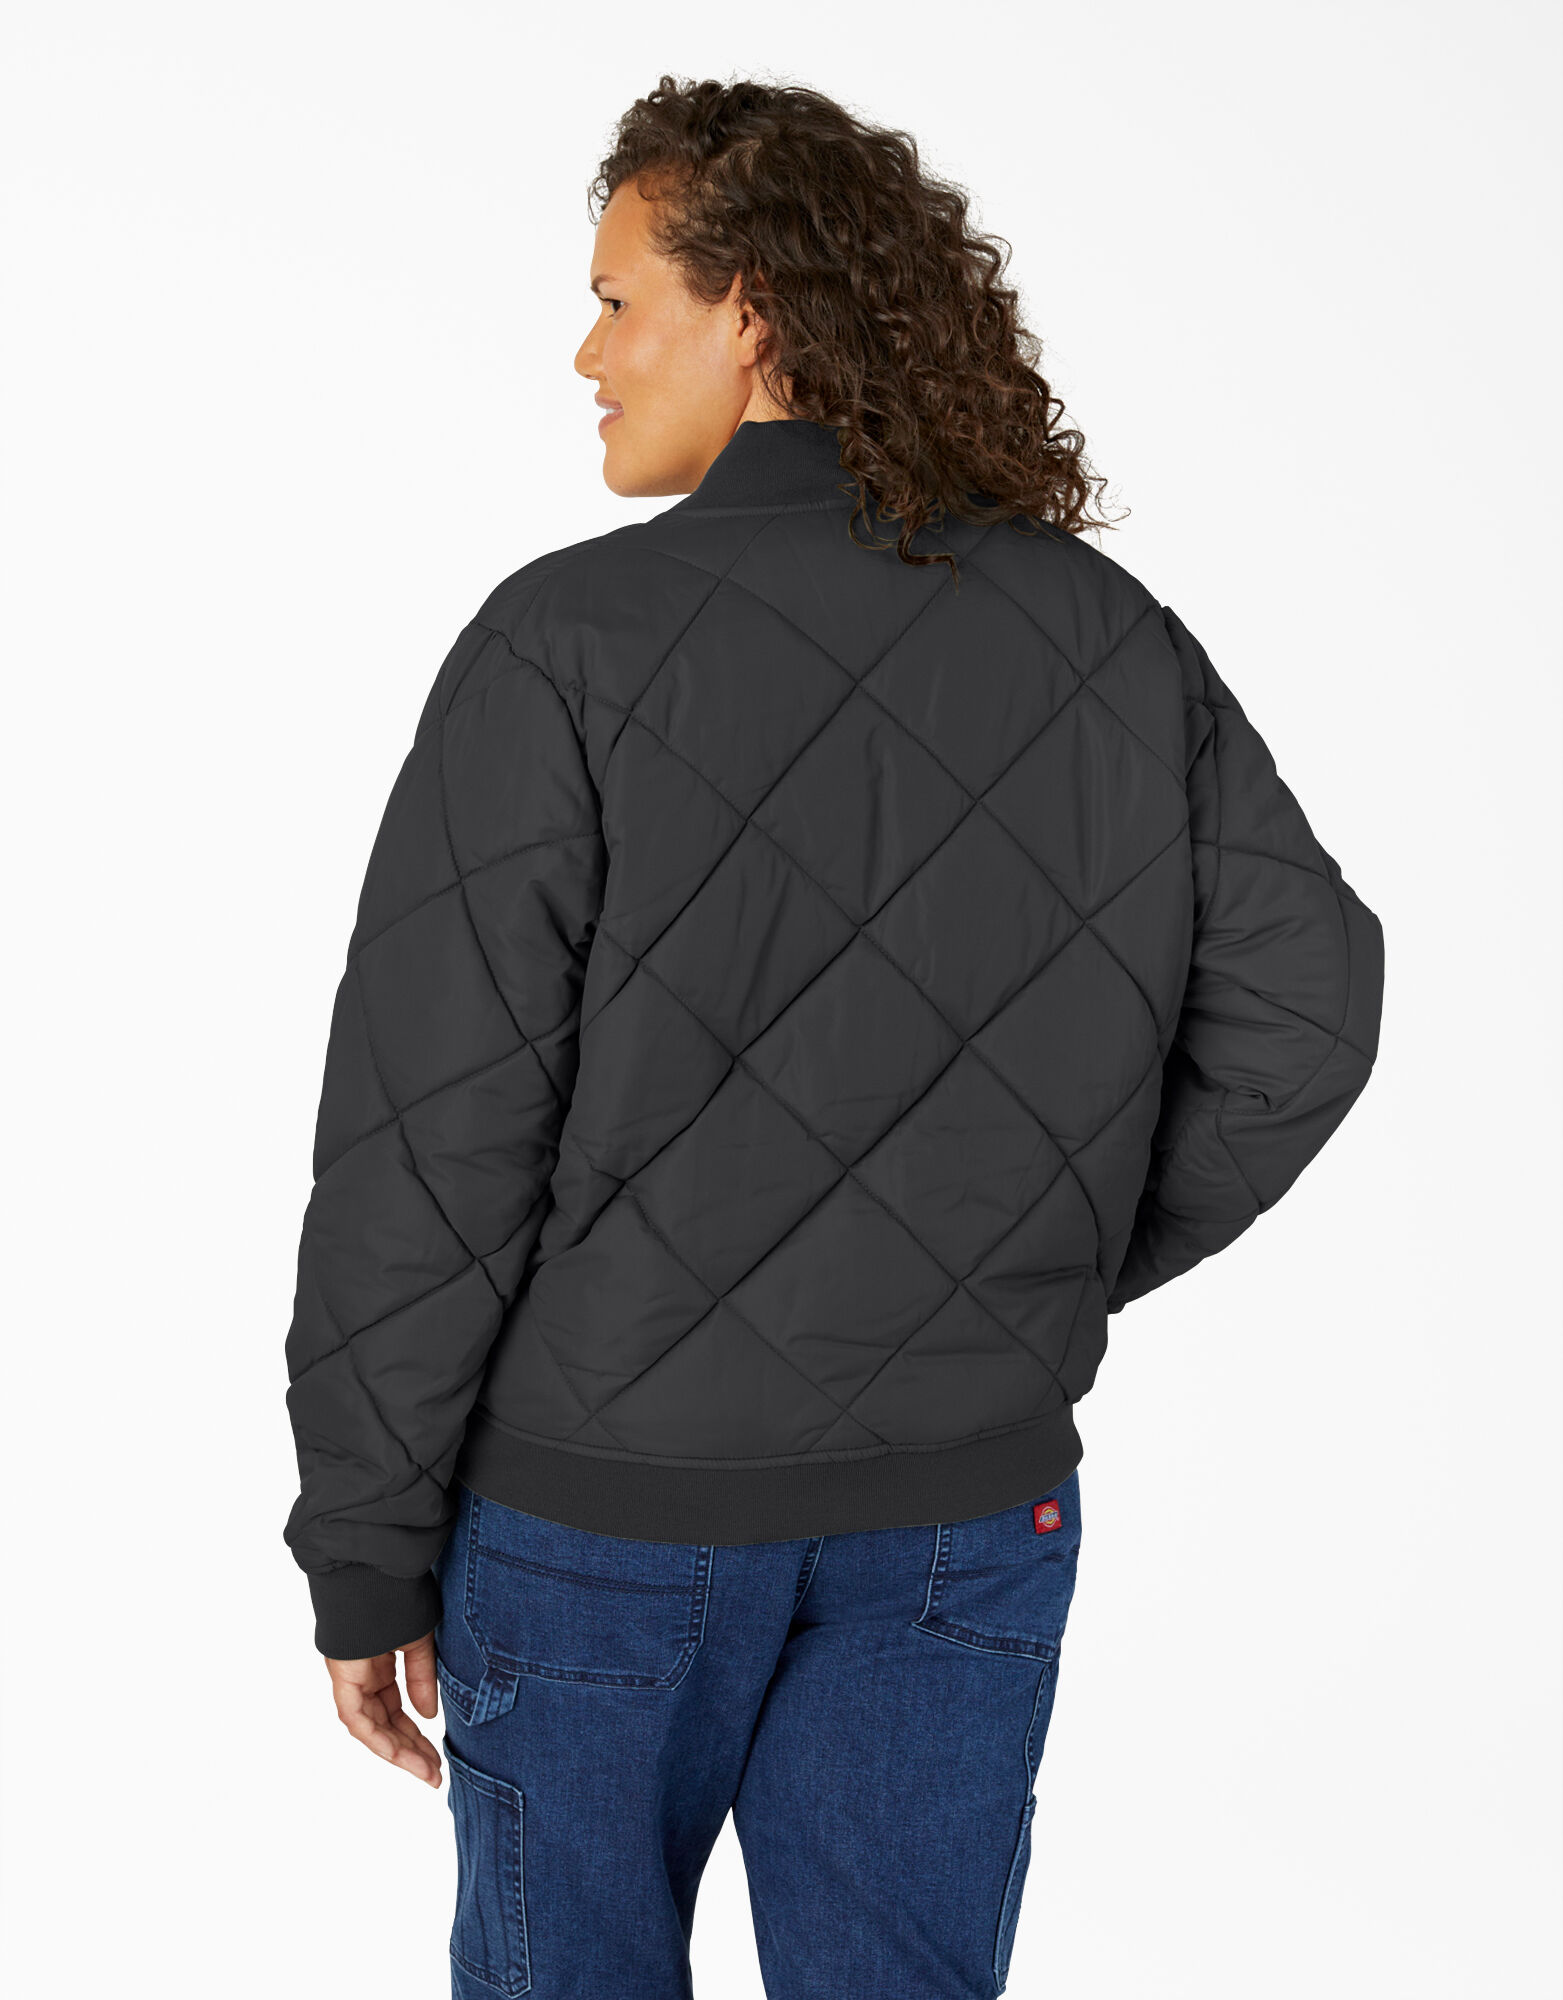 Dickies Womens Quilted Bomber Vest